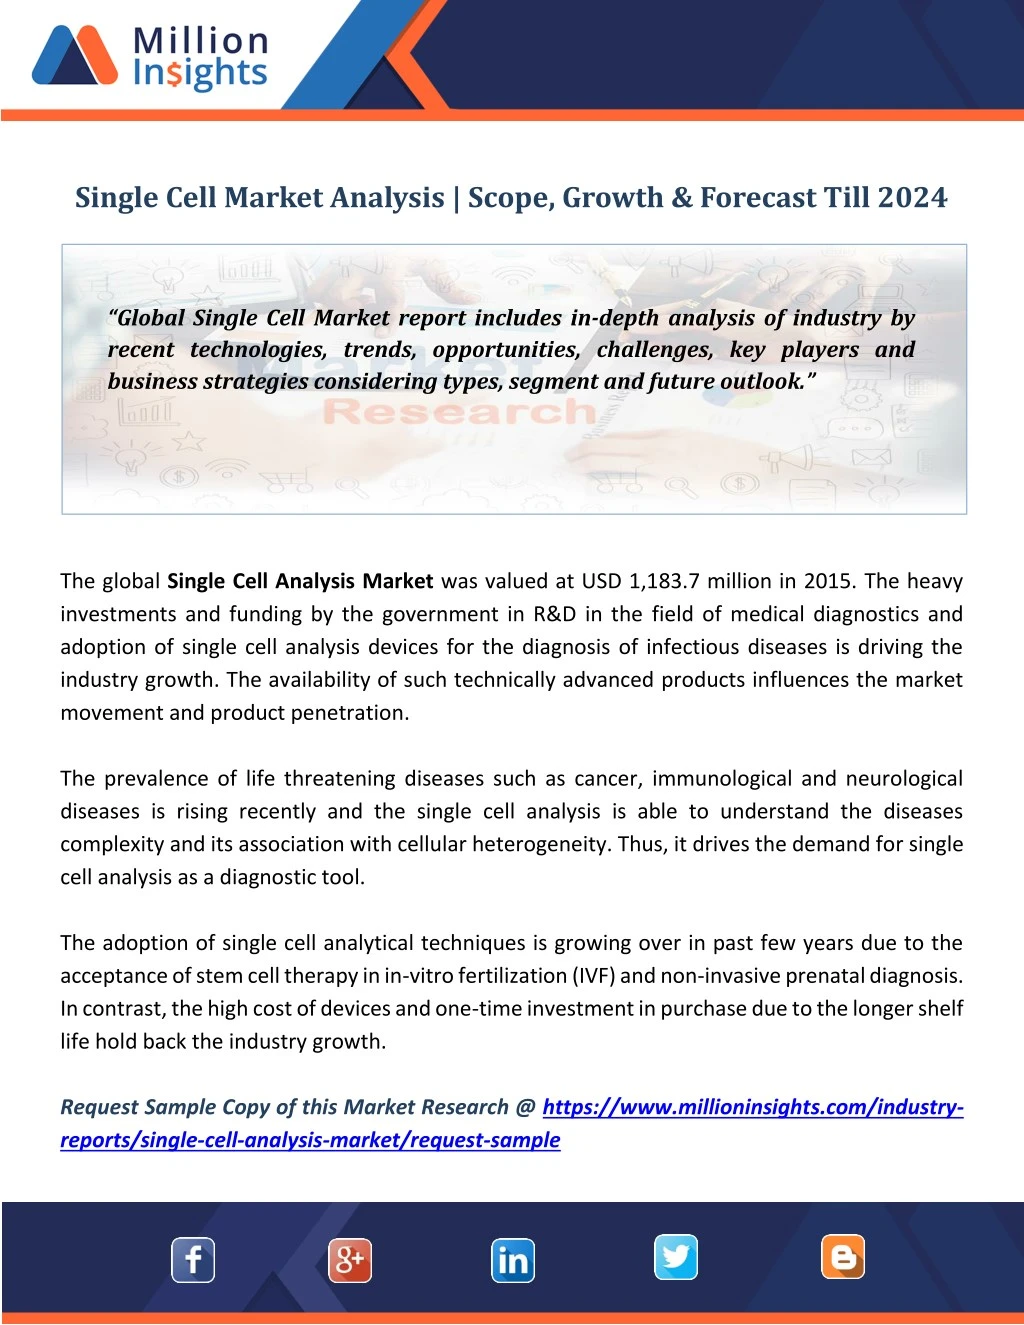 single cell market analysis scope growth forecast